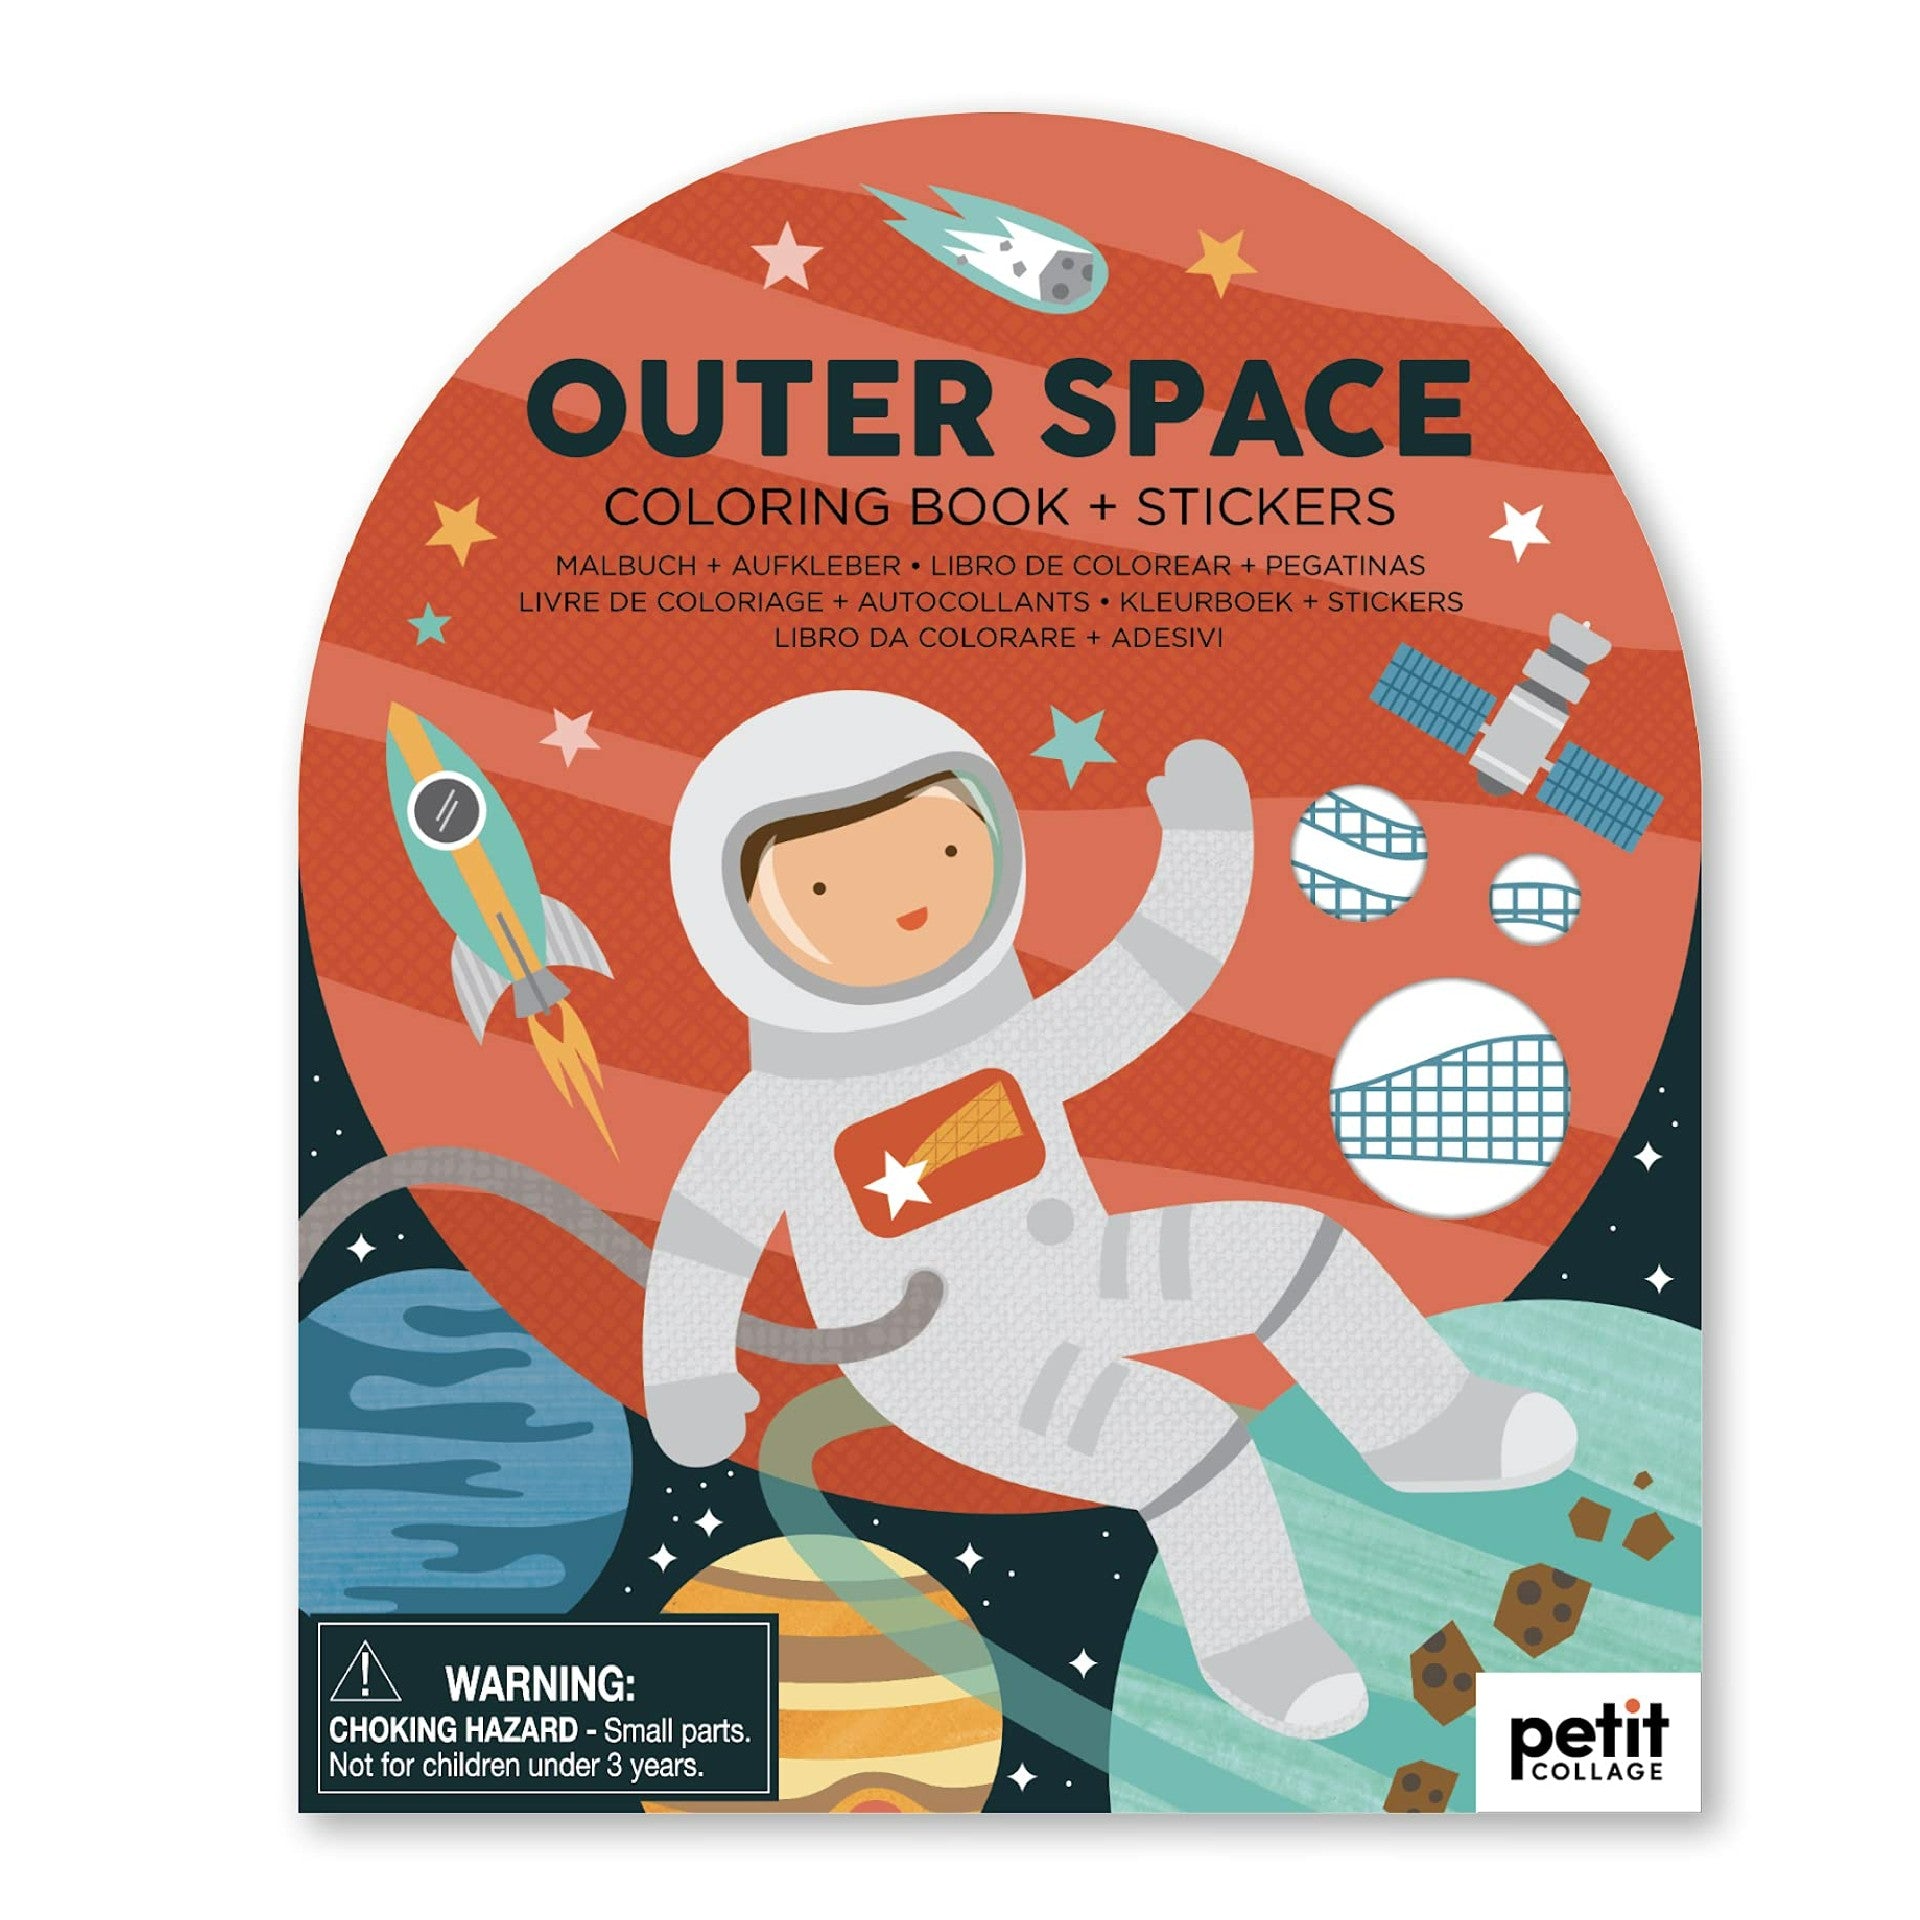 Outer Space Coloring Book + Stickers